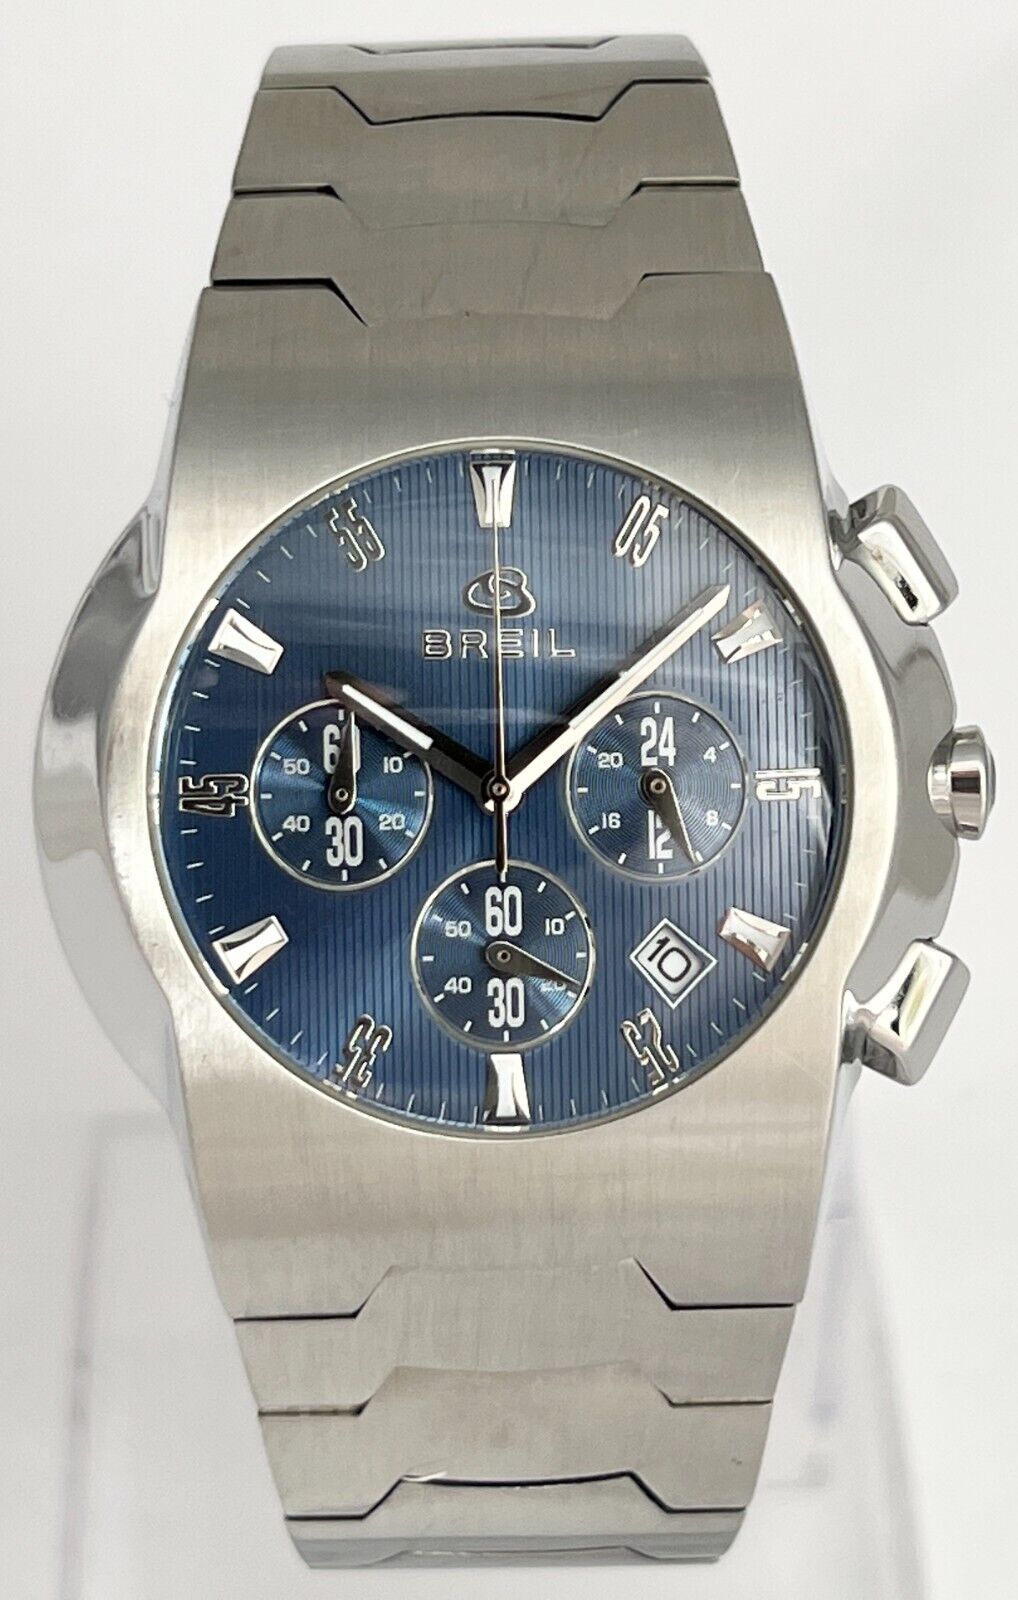 Breil Milano BW0138 for $178 for sale from a Private Seller on Chrono24